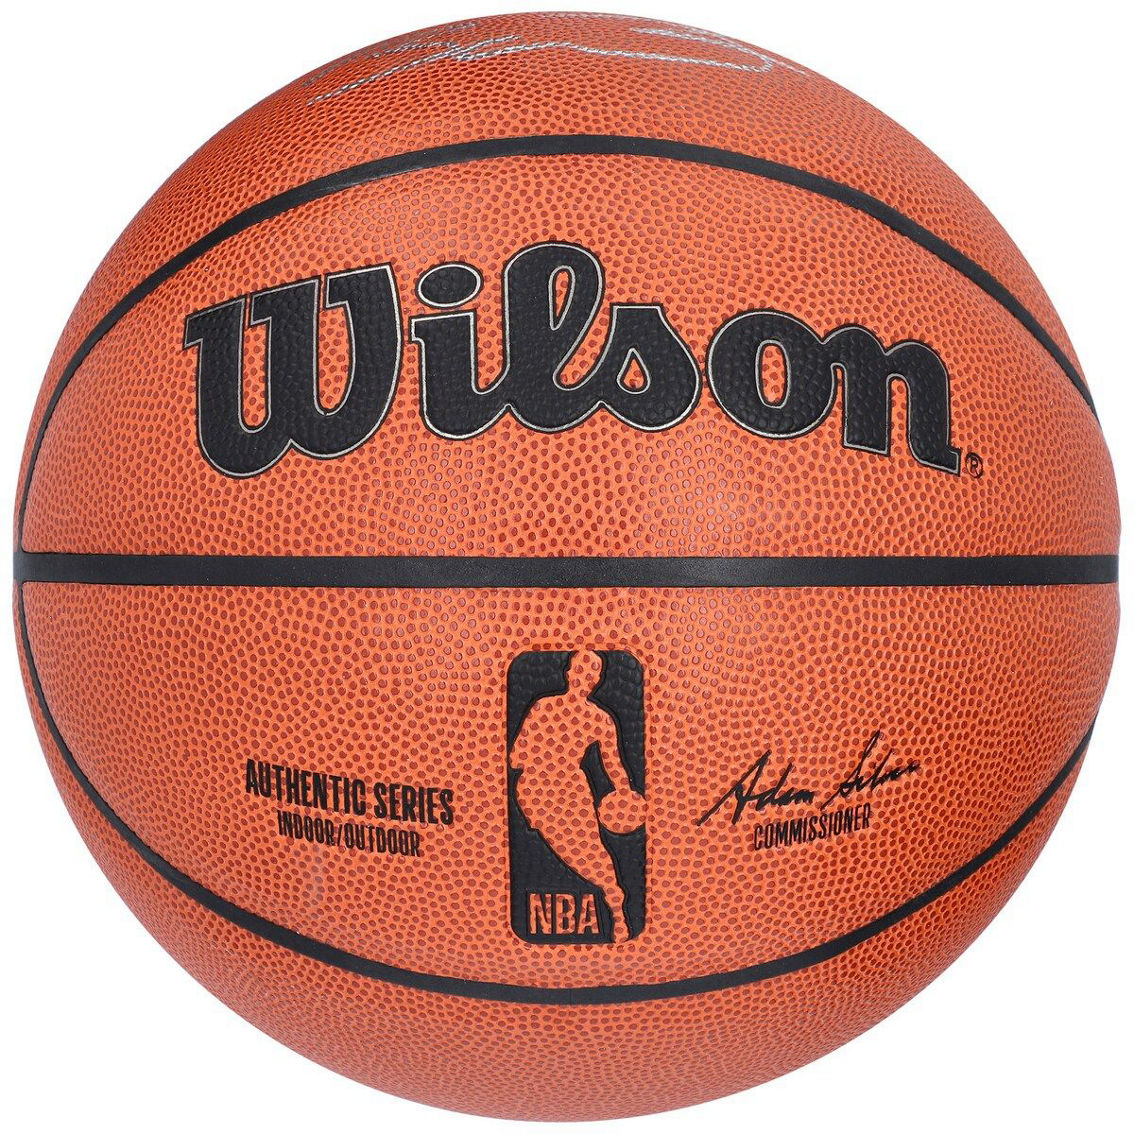 Fanatics Authentic Shaquille O'Neal & Dwyane Wade Miami Heat Autographed Wilson Authentic Series Indoor/Outdoor Basketball - Image 3 of 3